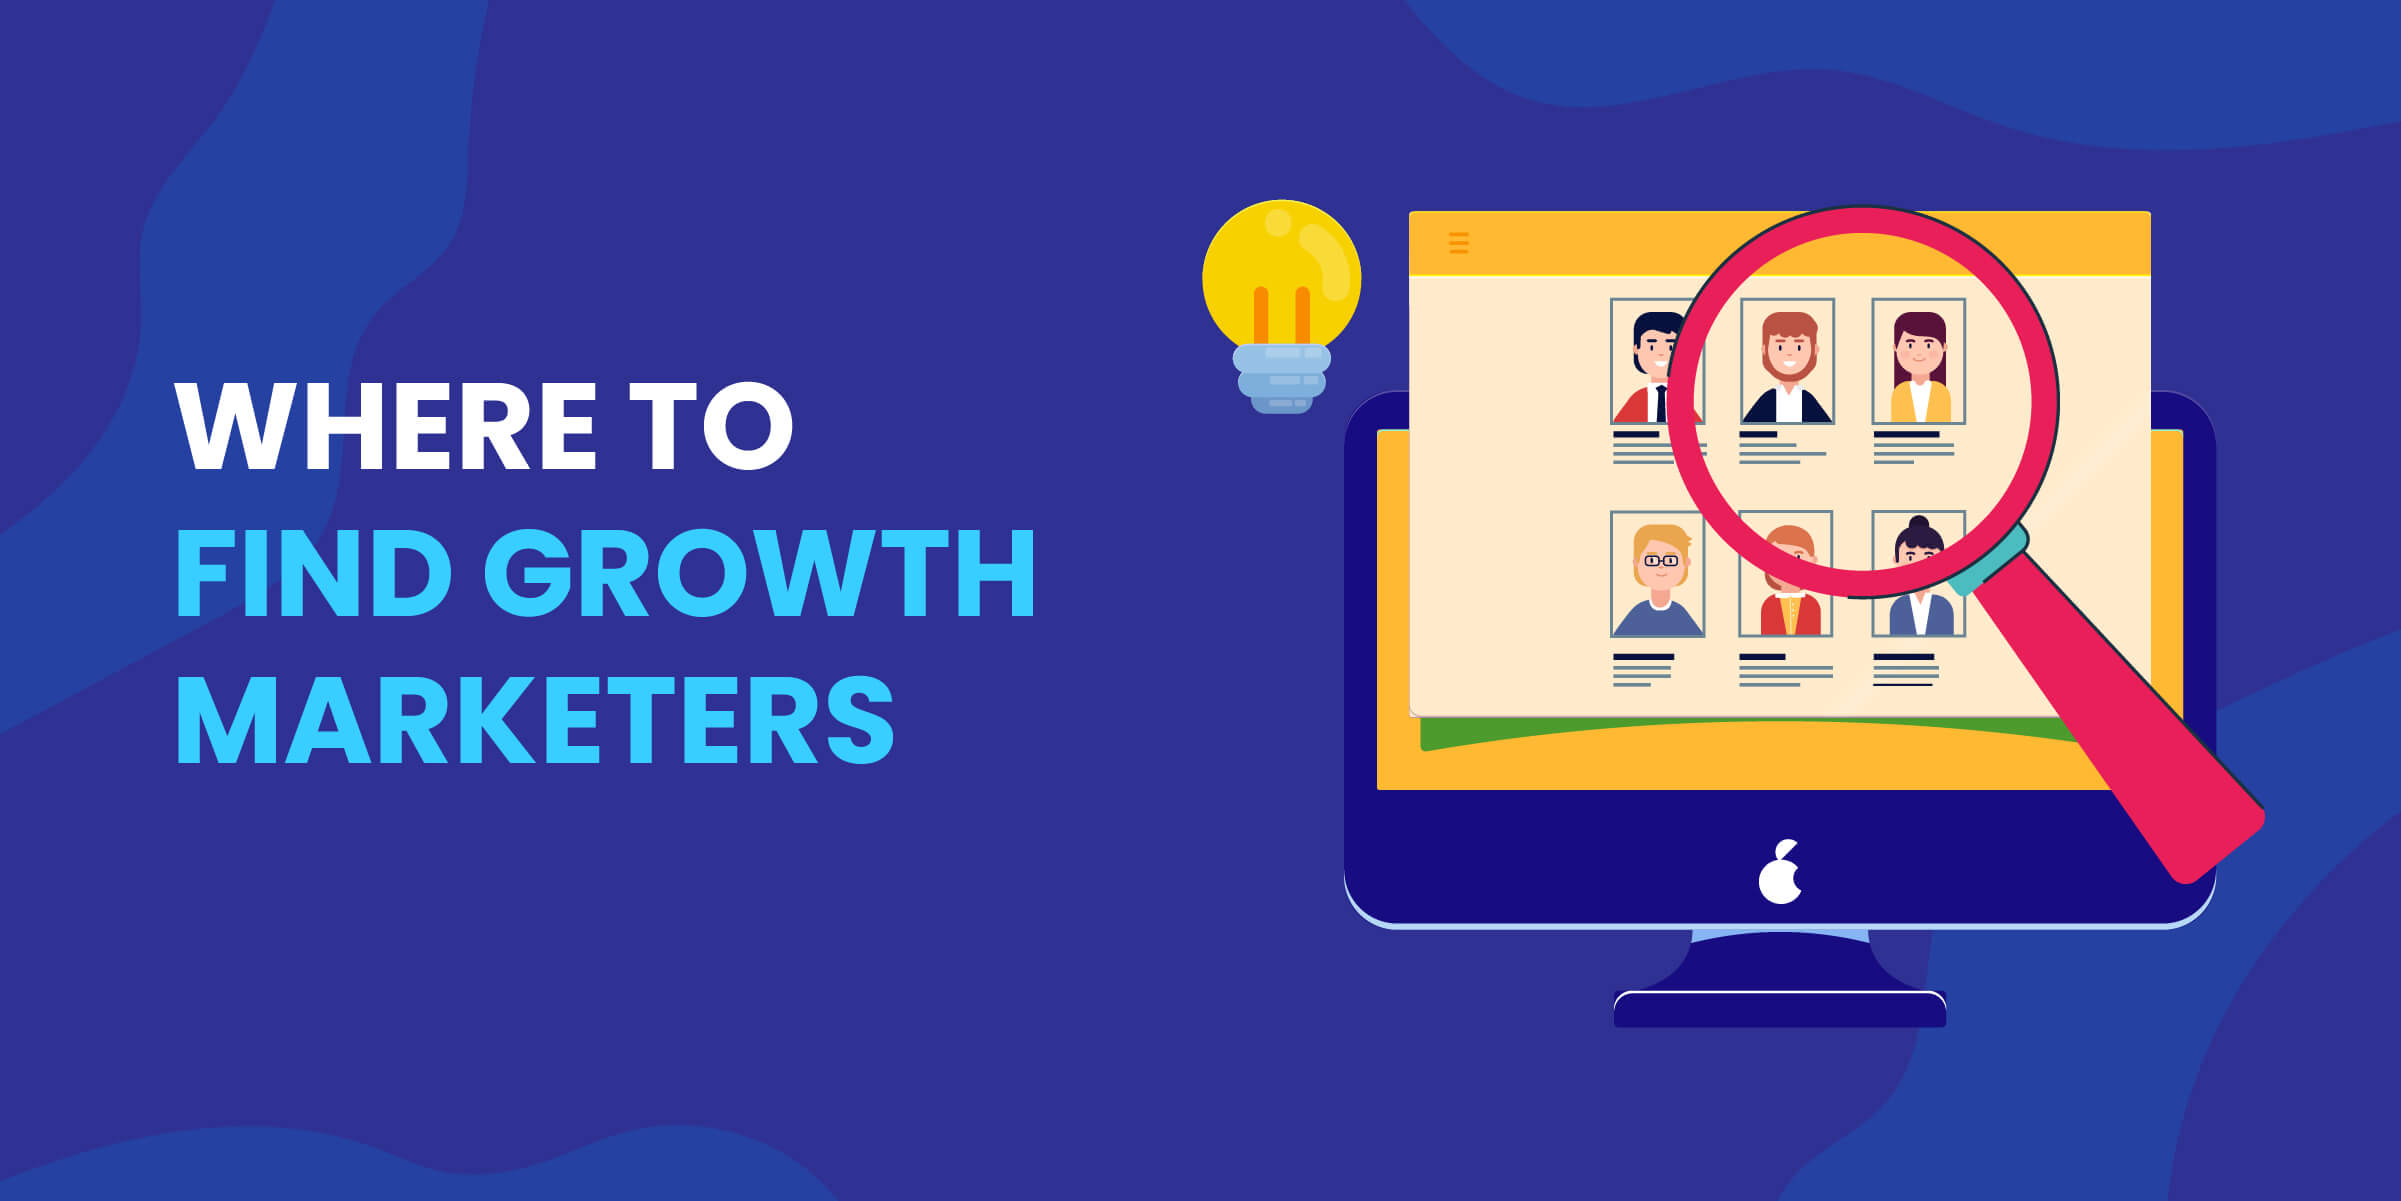 Where to Find Growth Marketers